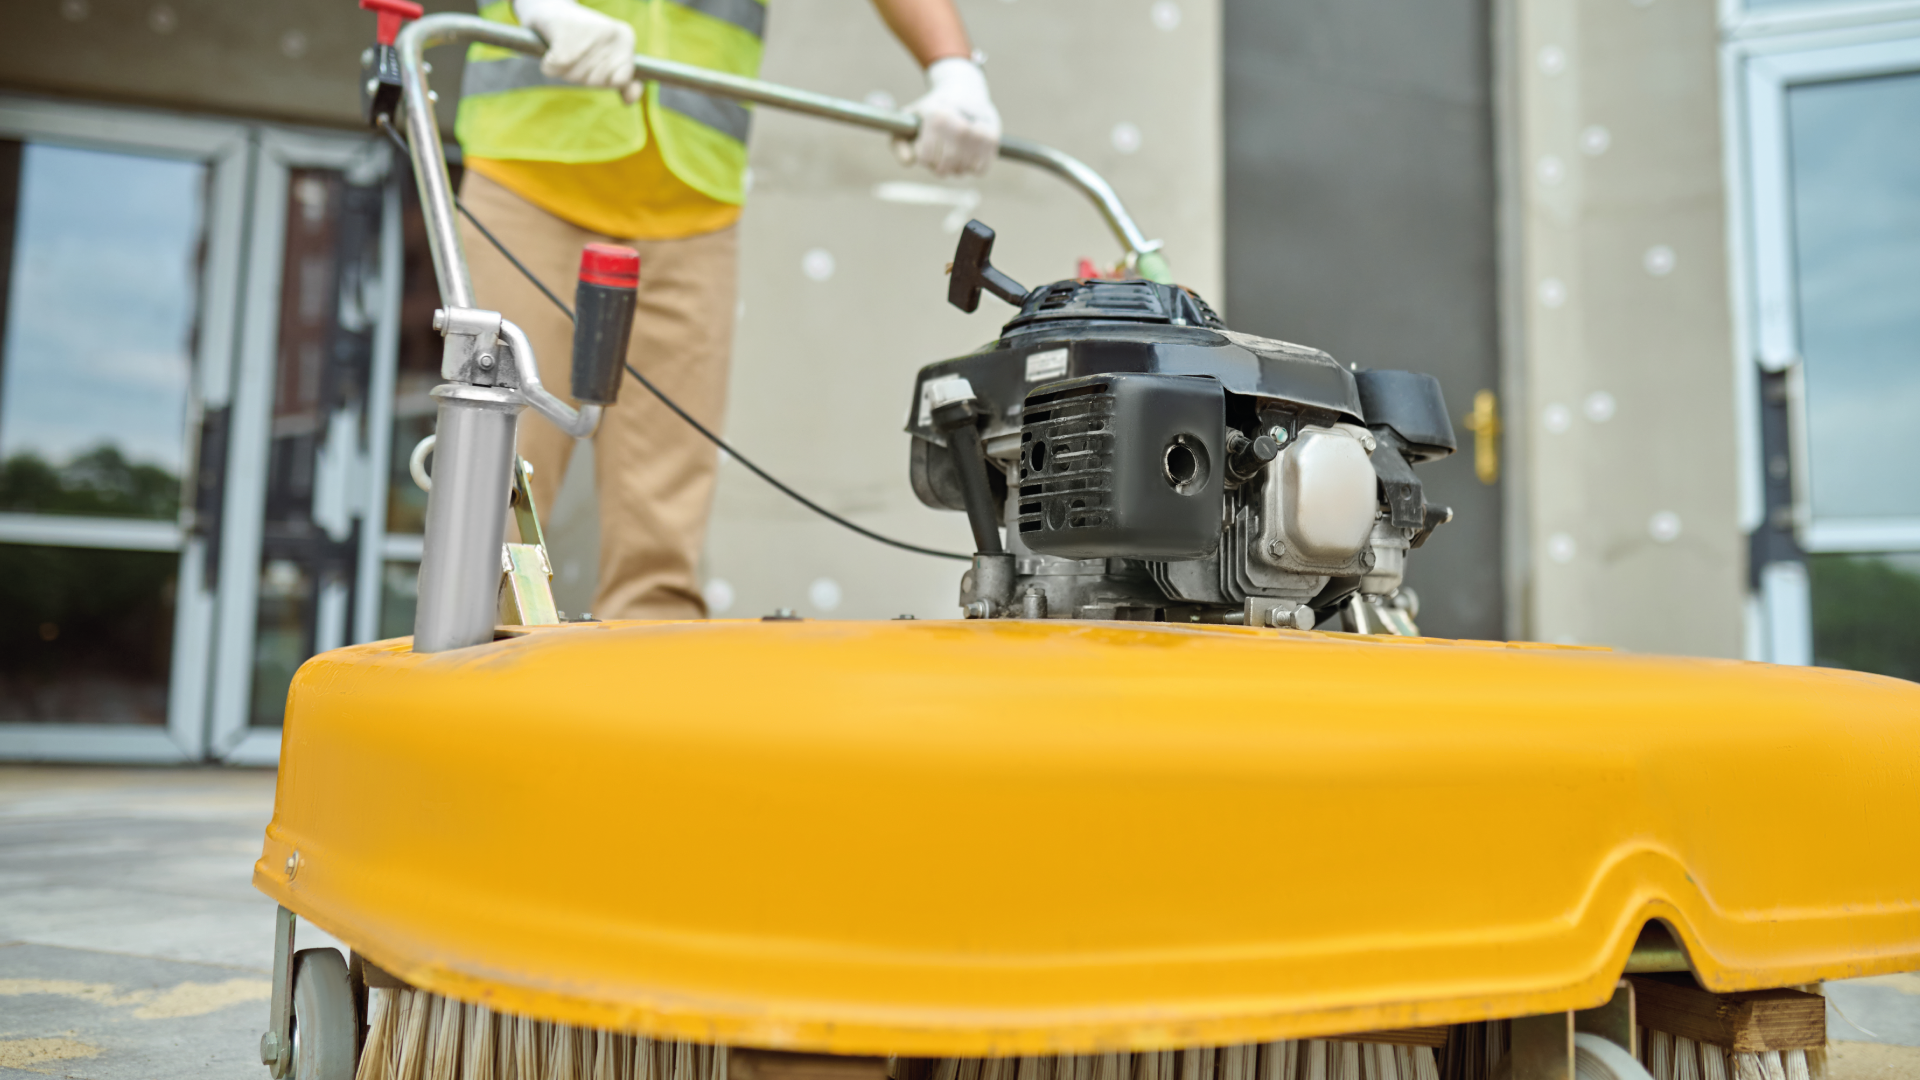 Why choose a professional construction cleaning service